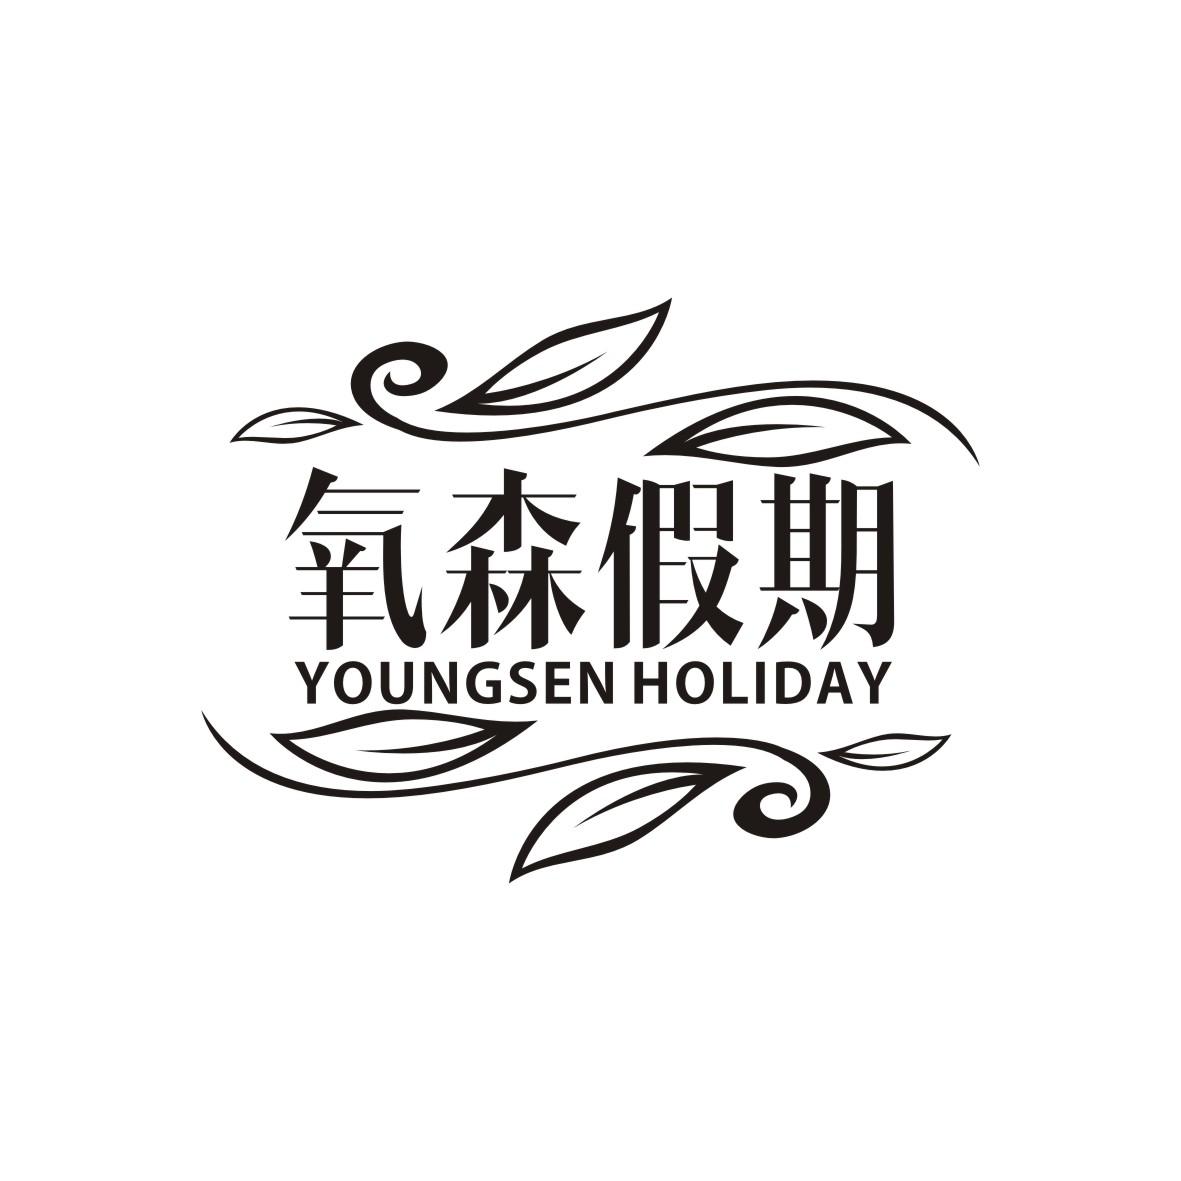 ɭ YOUNGSEN HOLIDAY